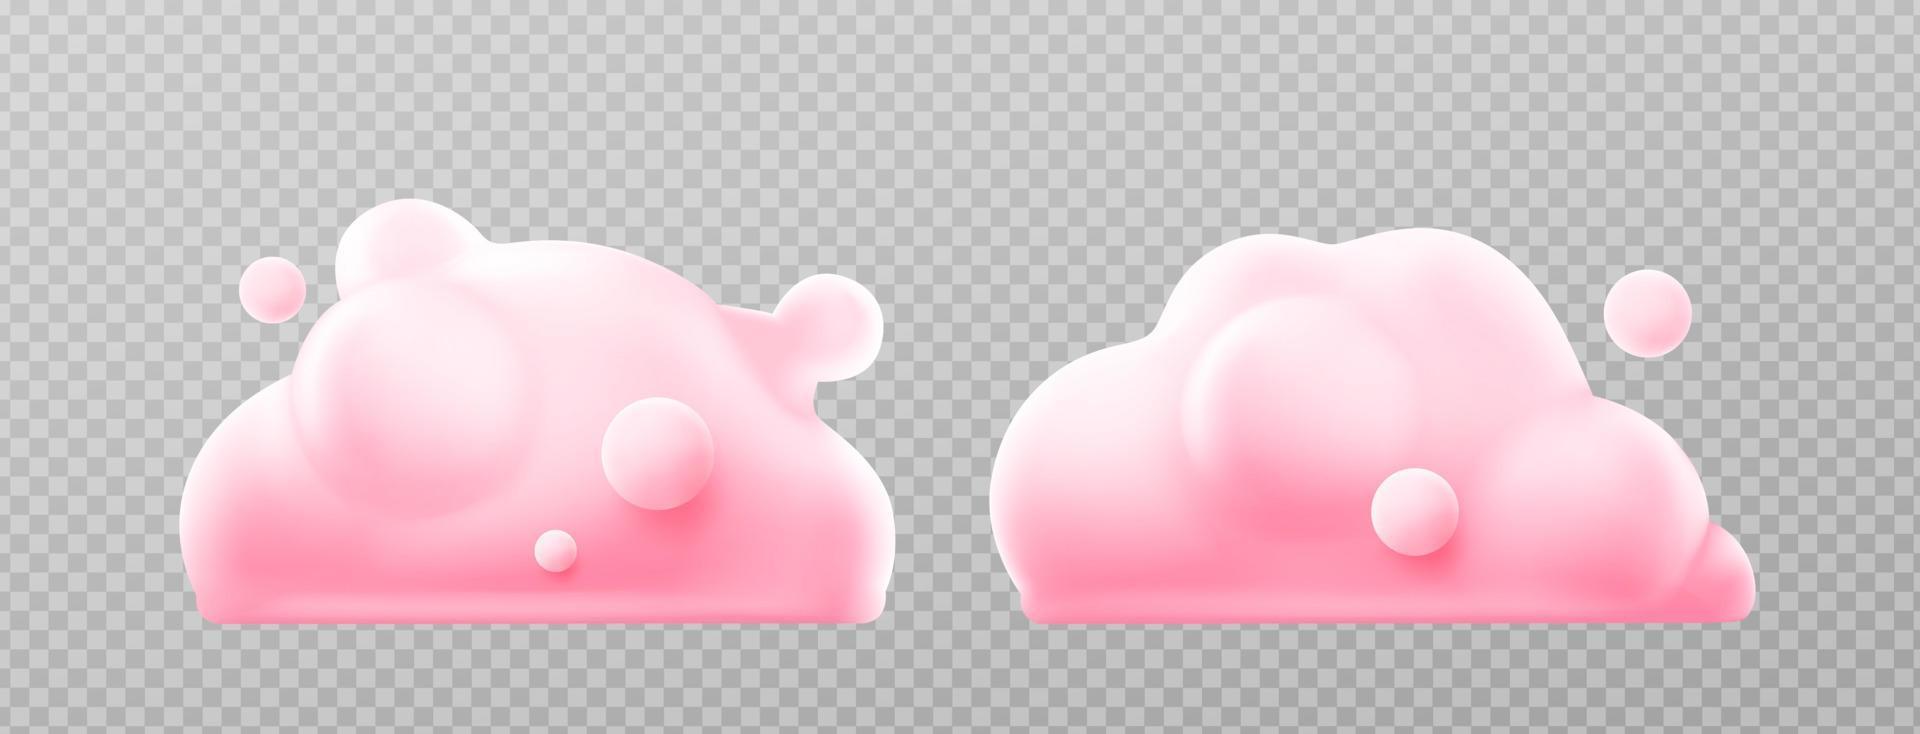 Pink fluffy clouds, 3d shapes of soap foam vector